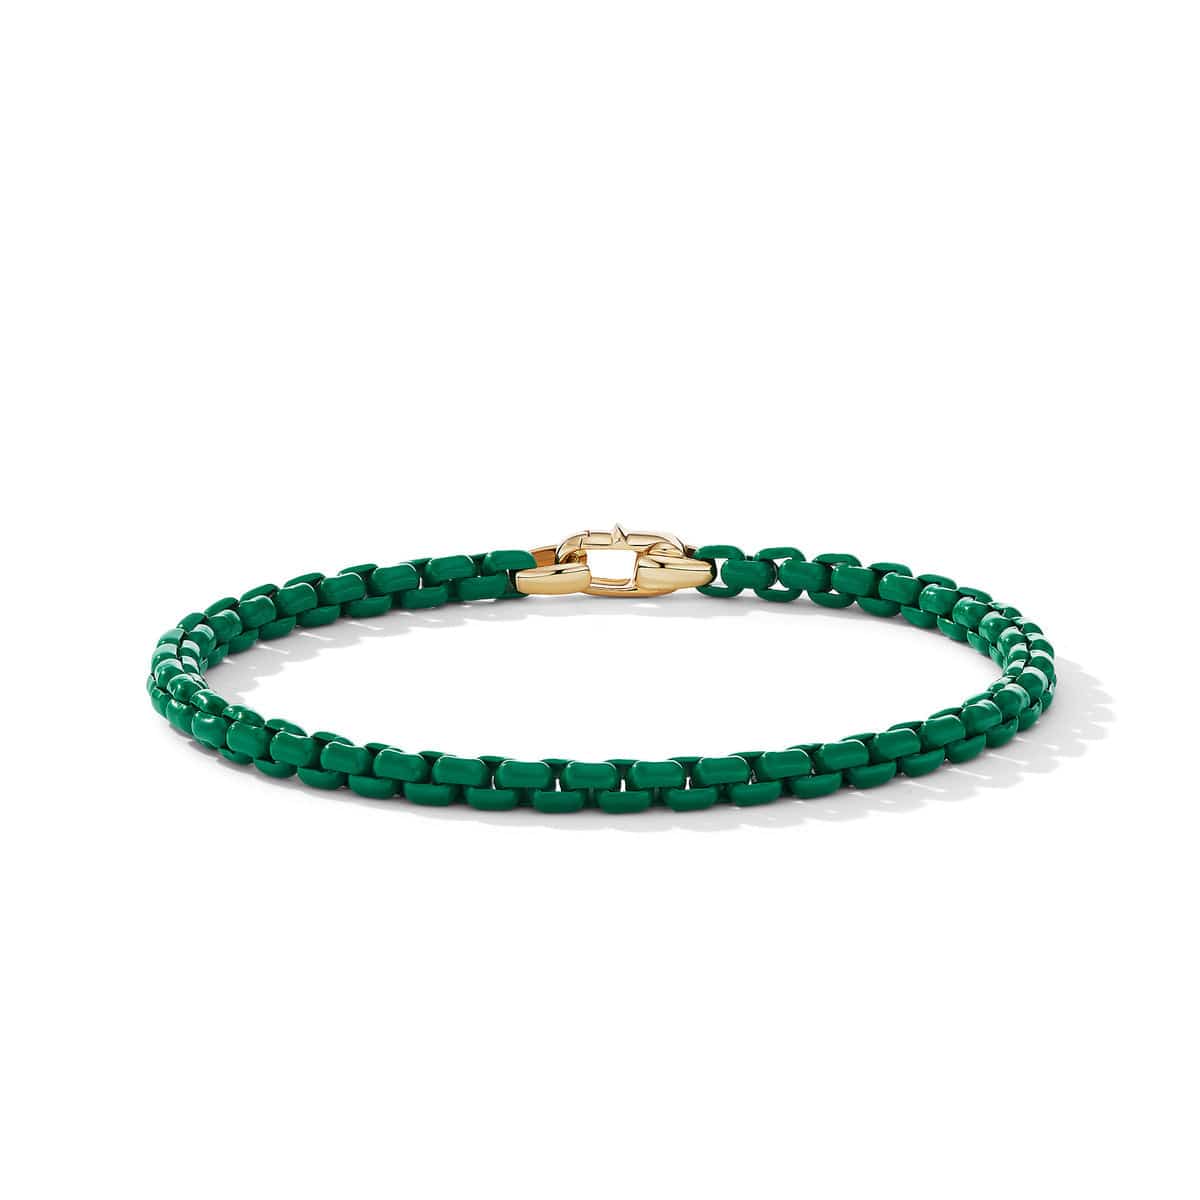 DY Bel Aire Chain Bracelet in Emerald Green with 14K Yellow Gold Accent Long's Jewelers